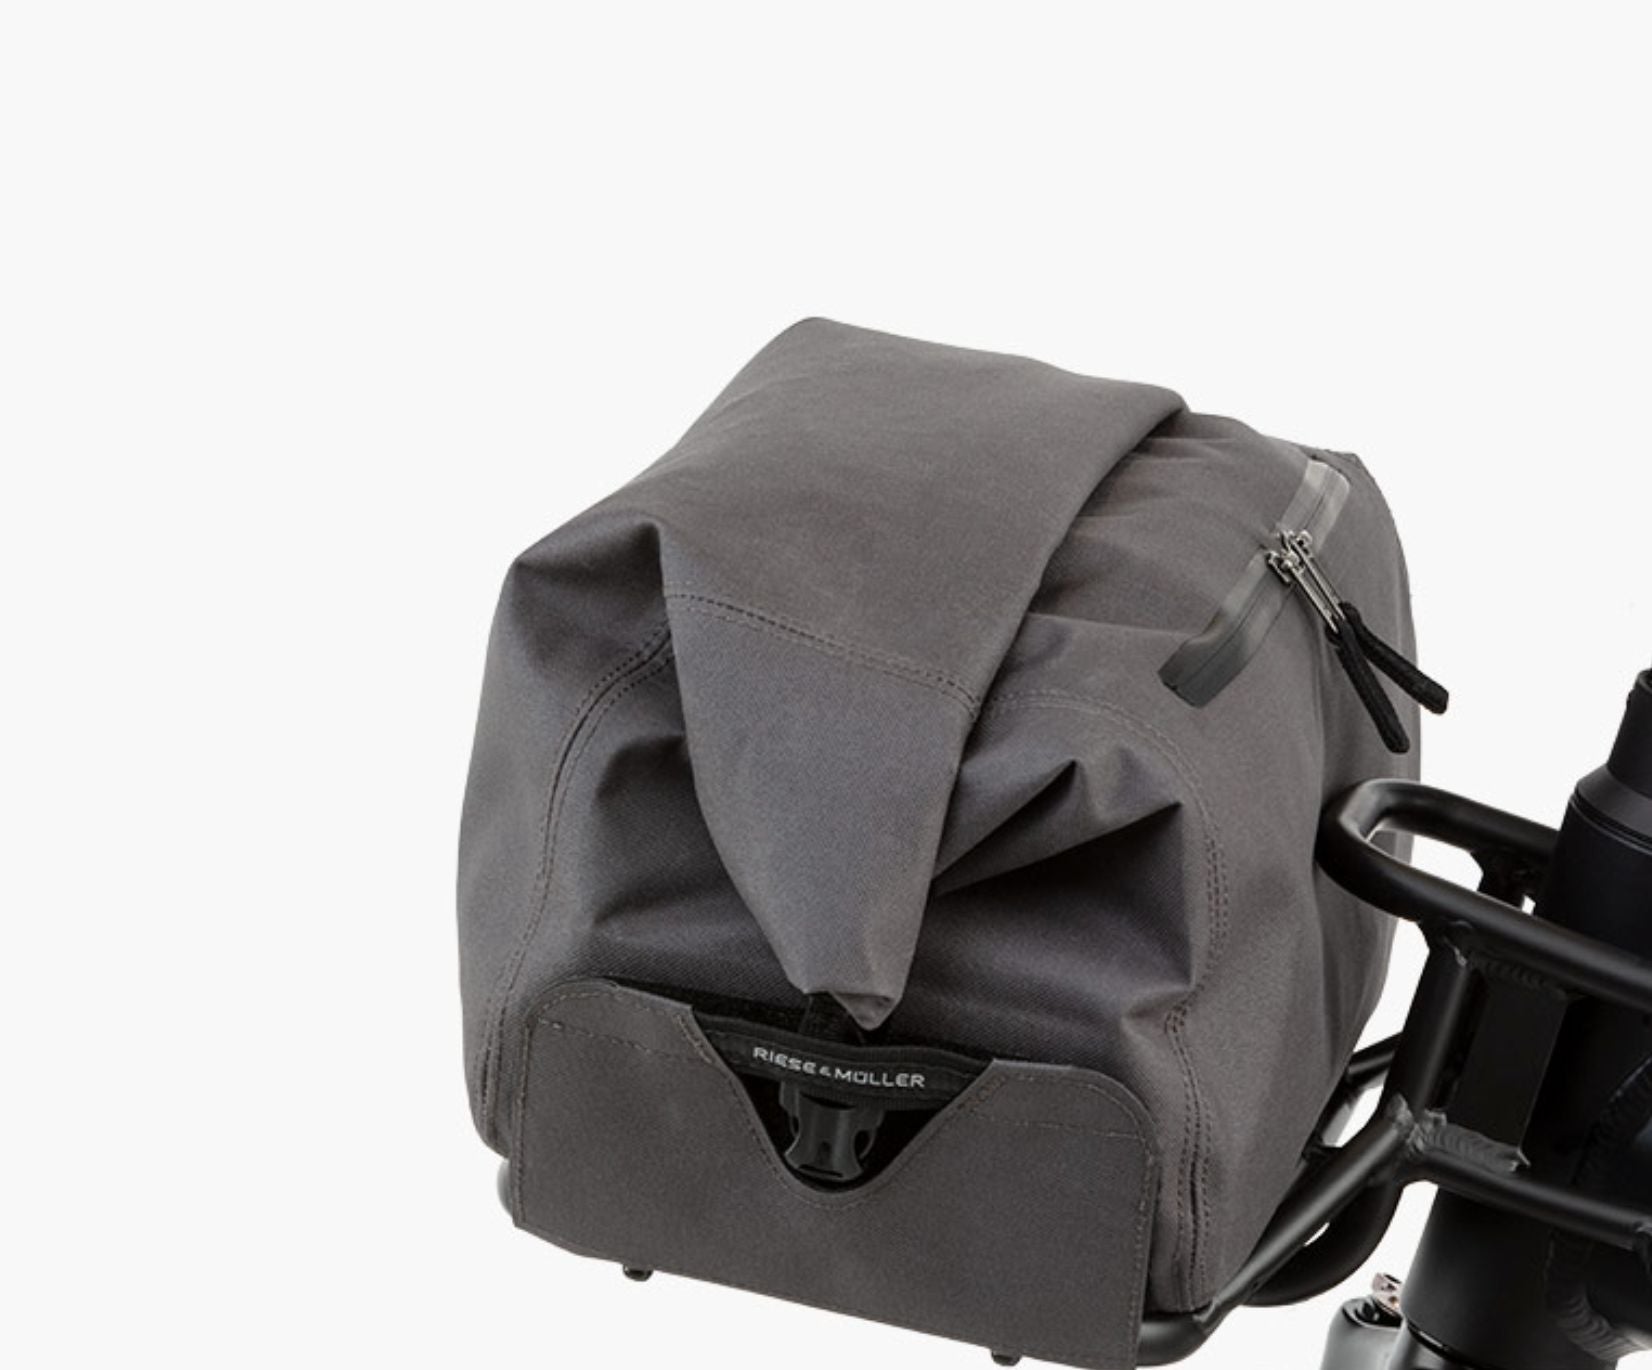 Riese & Muller Front Carrier with bag oprion, closeup